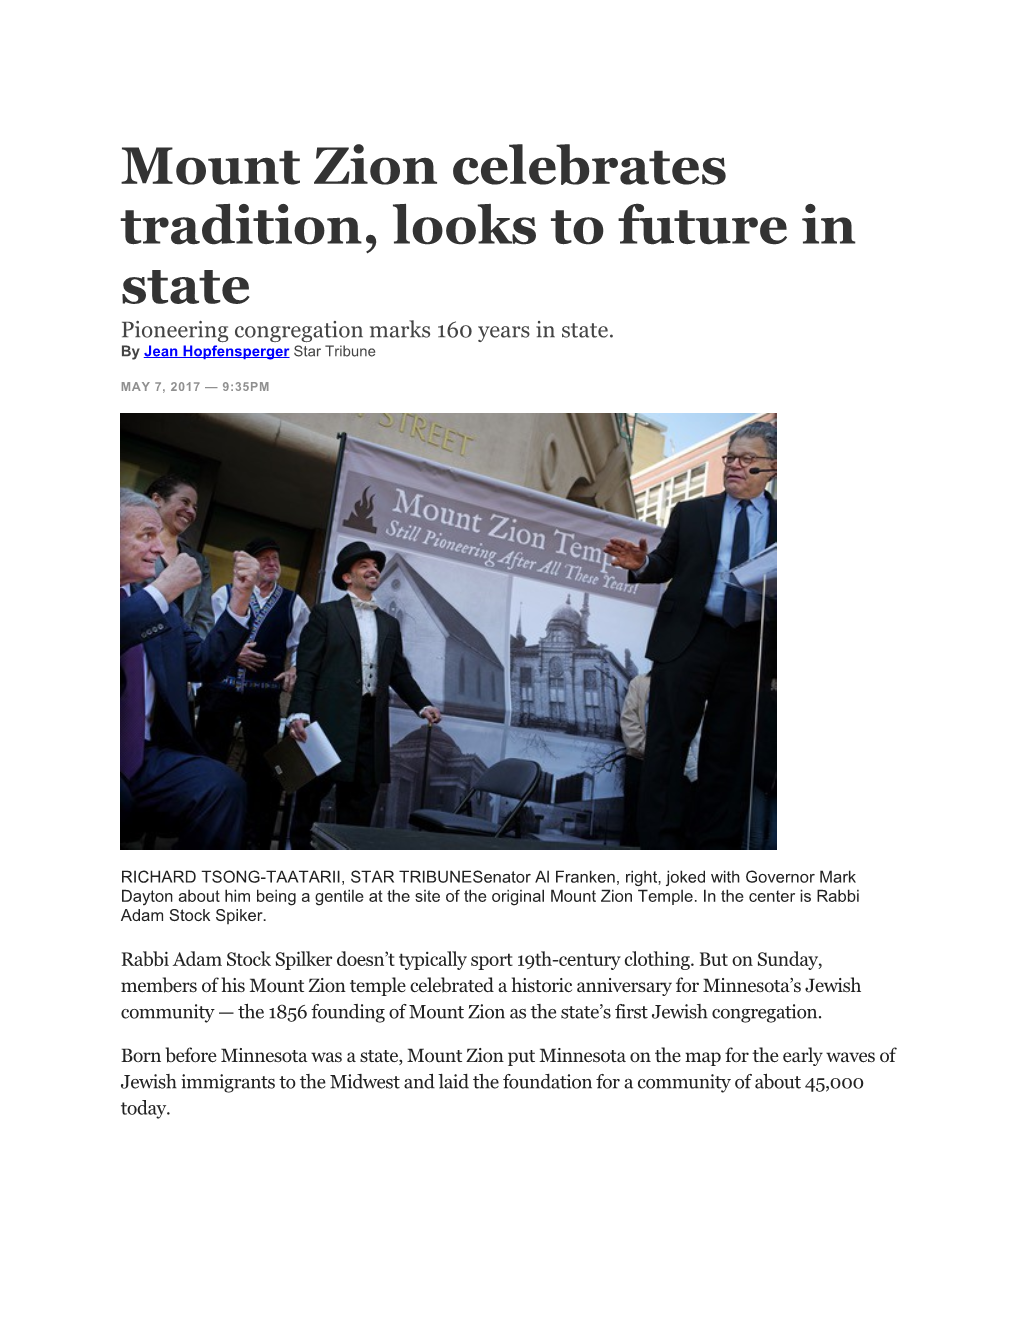 Mount Zion Celebrates Tradition, Looks to Future in State